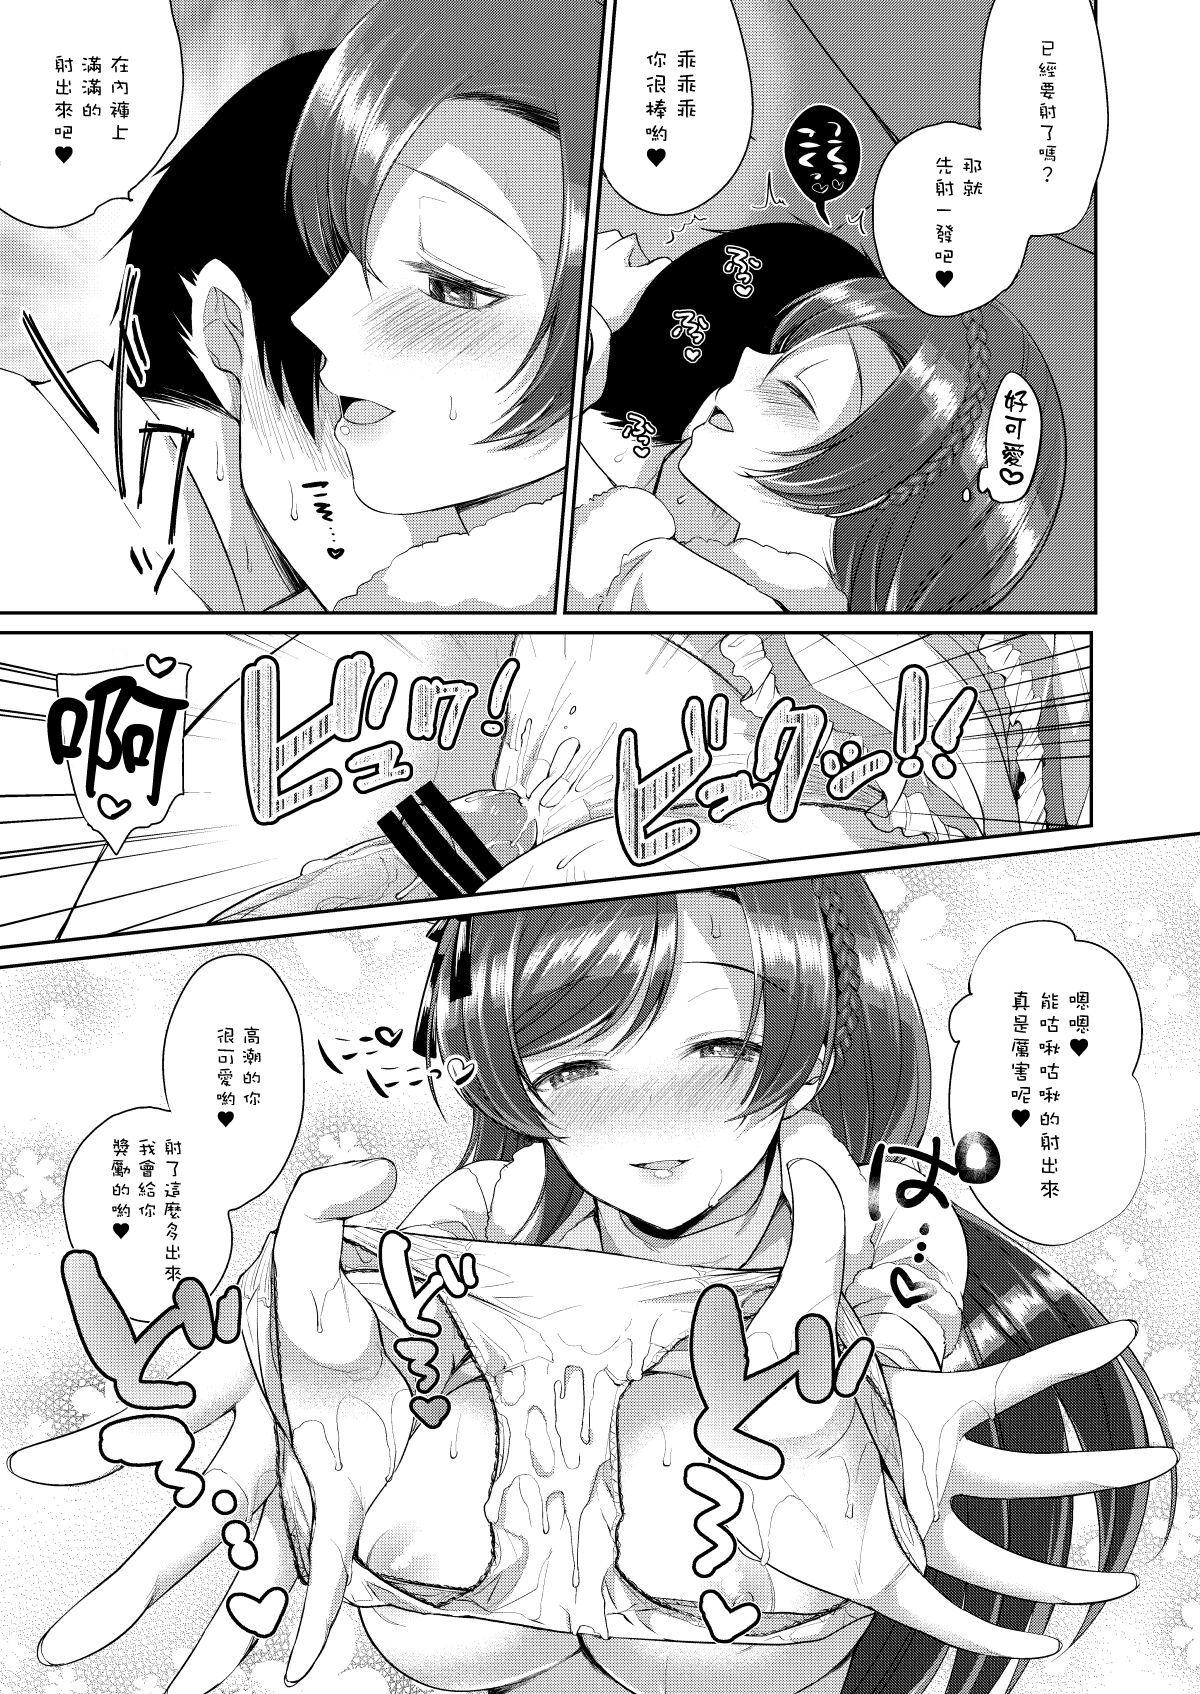 Tits 希といちゃラブエッチ - Love live Gay Clinic - Page 5